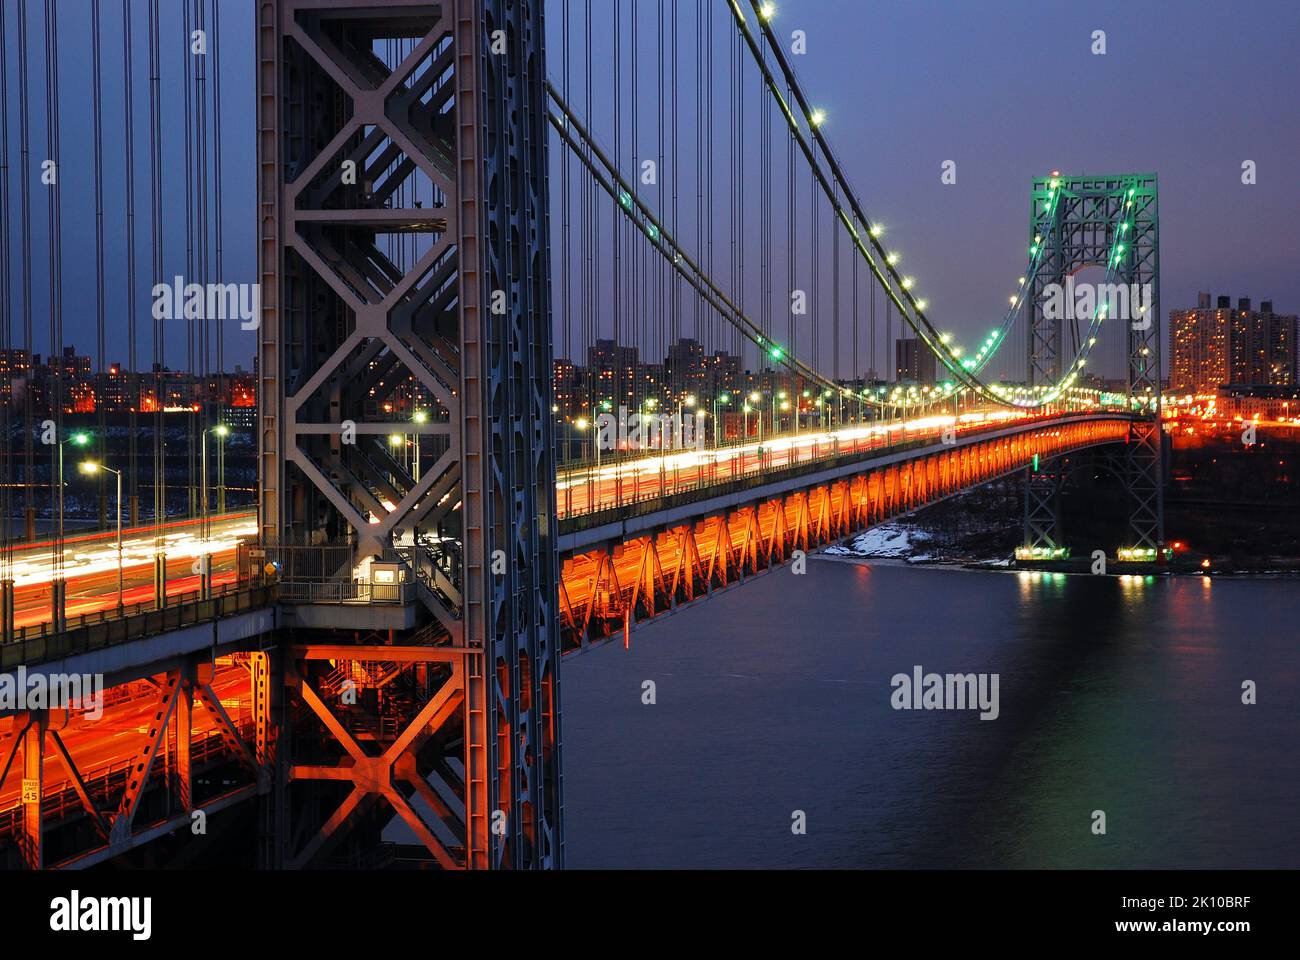 Traffic moves across the George Washington Bridge over the Hudson River, connecting New York and New Jersey along !-95 Stock Photo